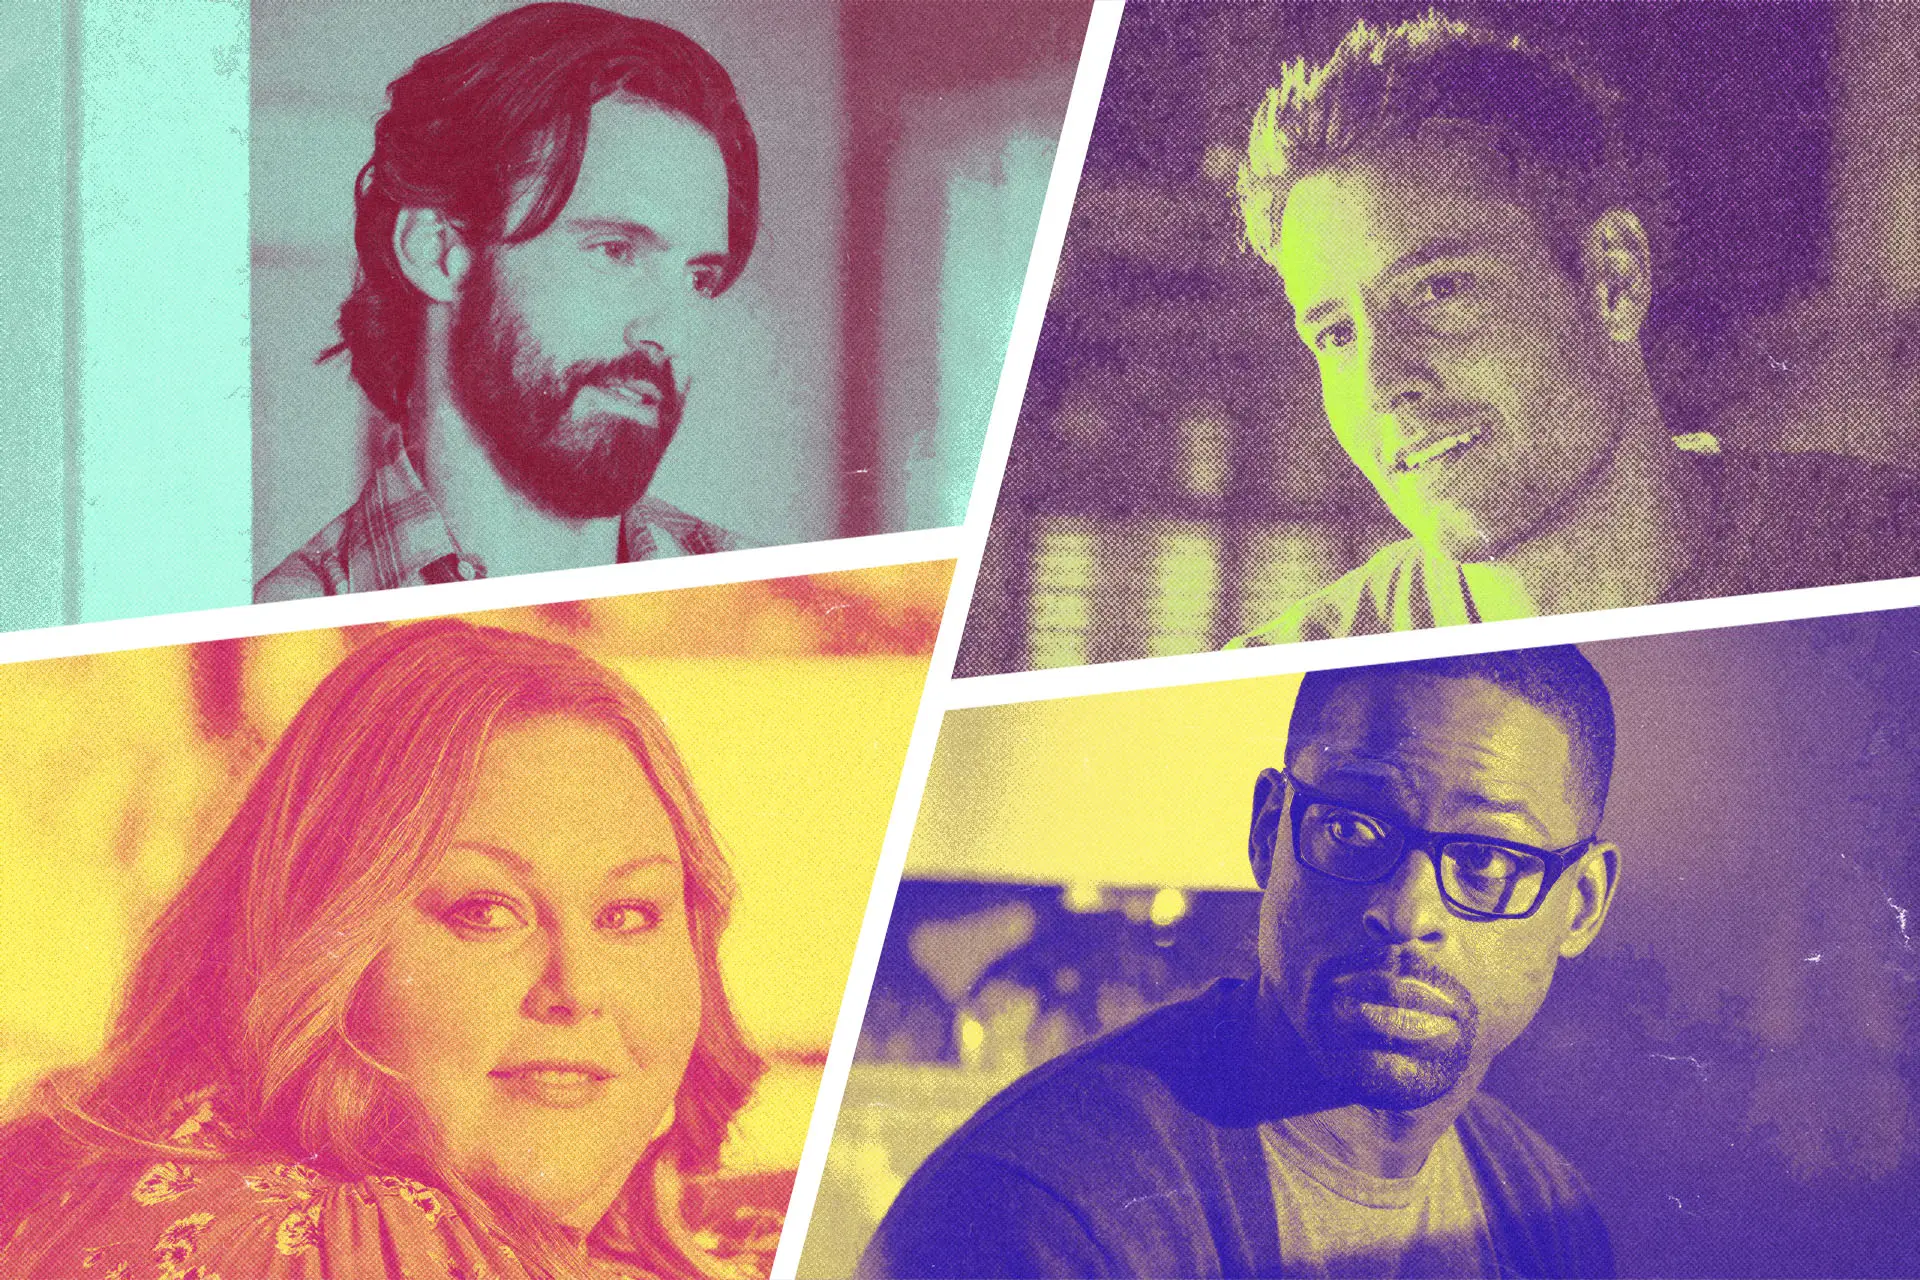 Six Years of Tears: 'This is Us' Wraps Up its Incredible Run on a High Note | Features | LIVING LIFE FEARLESS